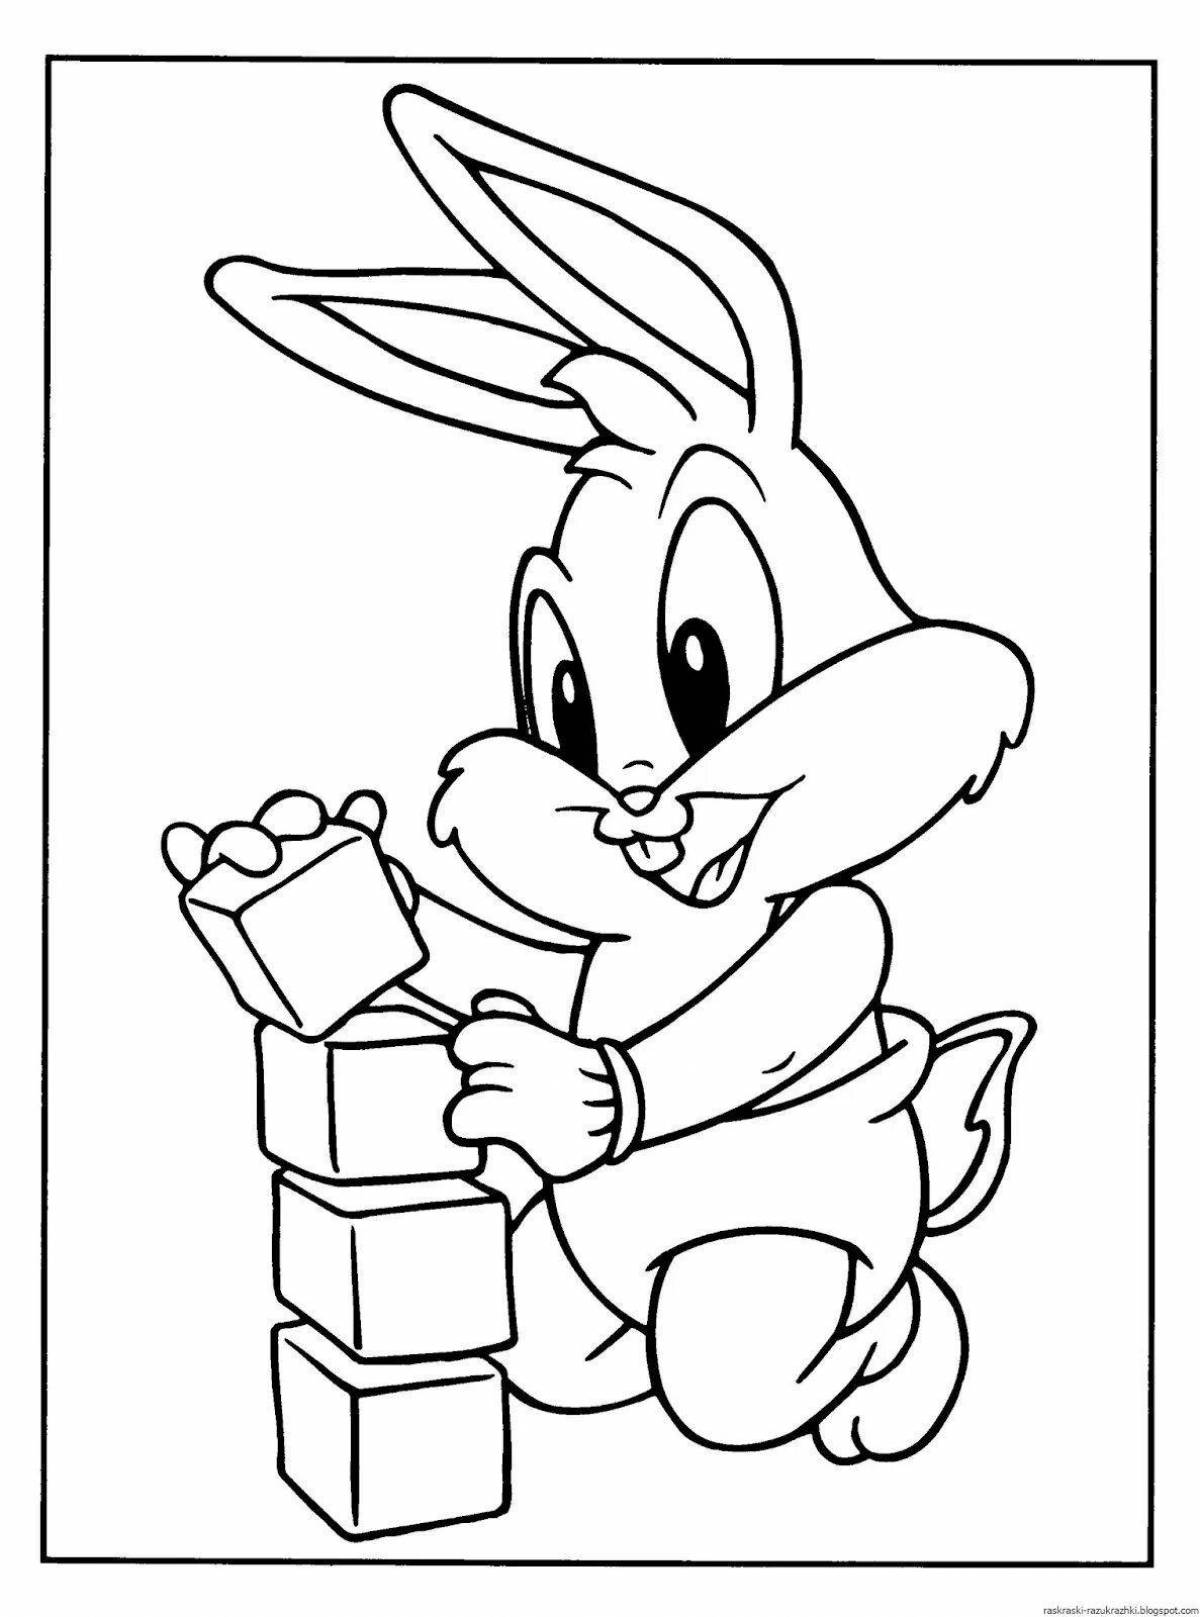 Coloring book for children 3-4 years old from cartoons